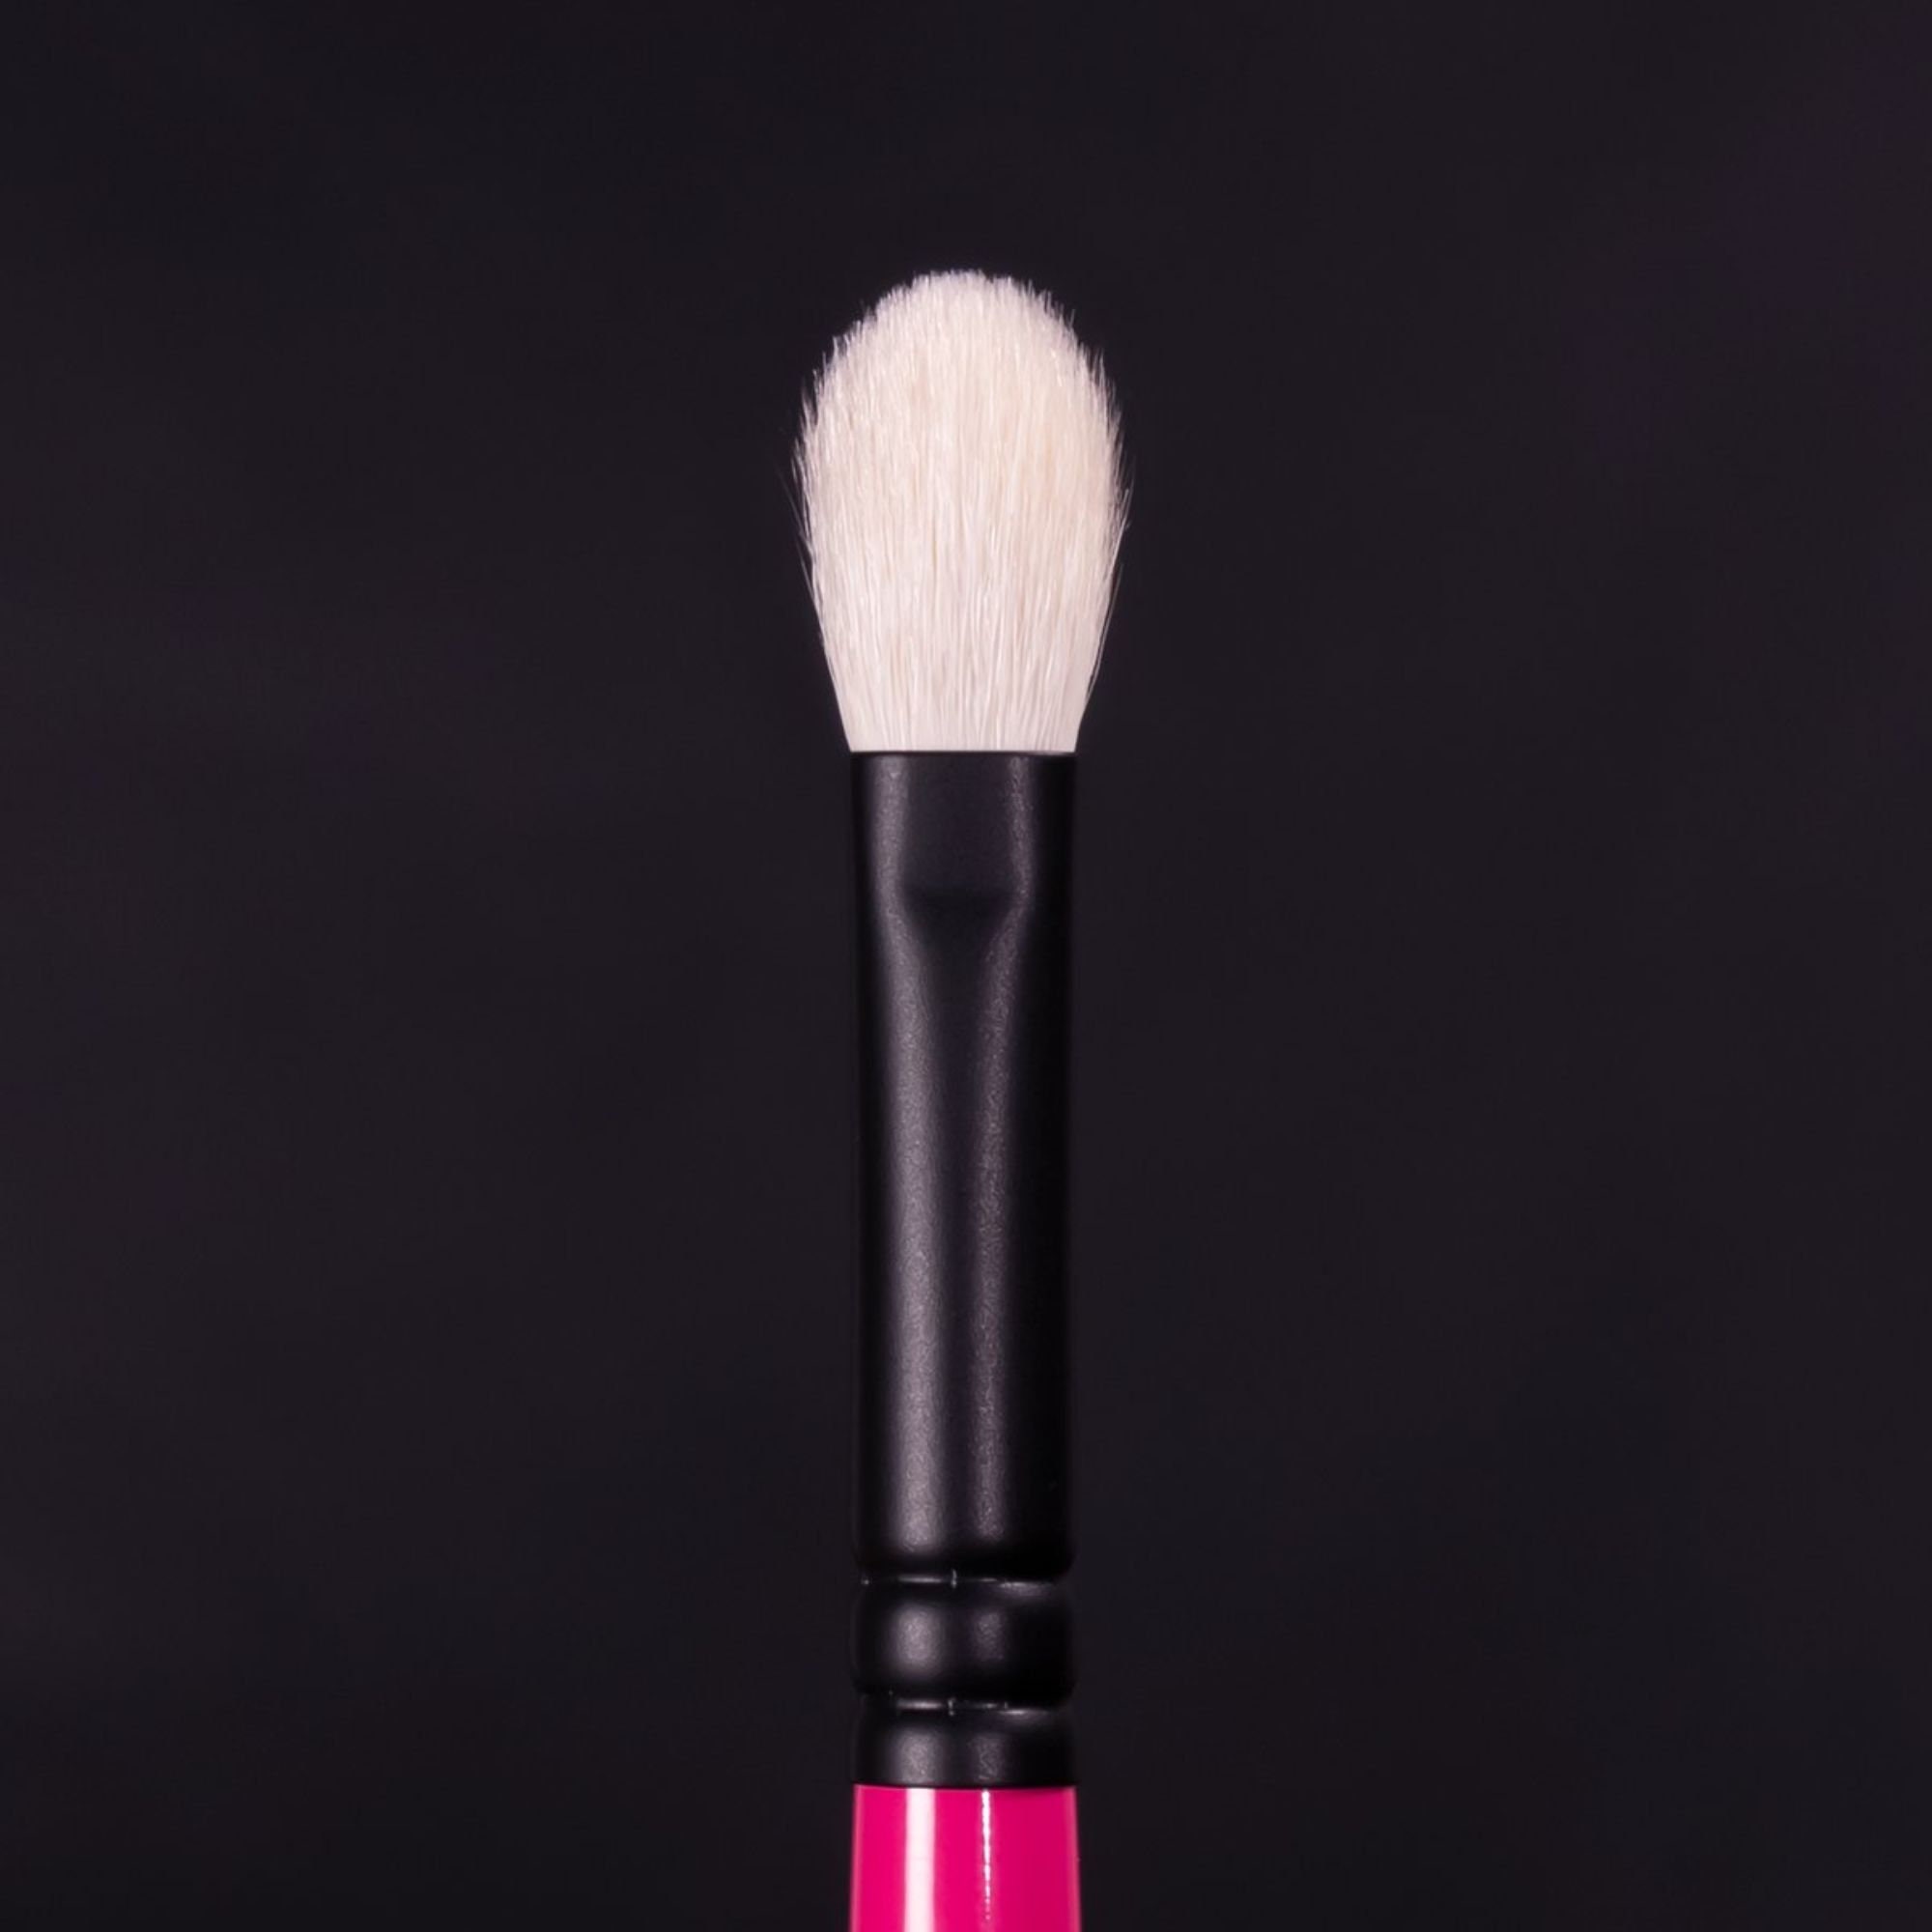 Whats Up Beauty - R105 Tapered Blending Eyeshadow Brush For Eye Shadow Makeup Cruelty Free